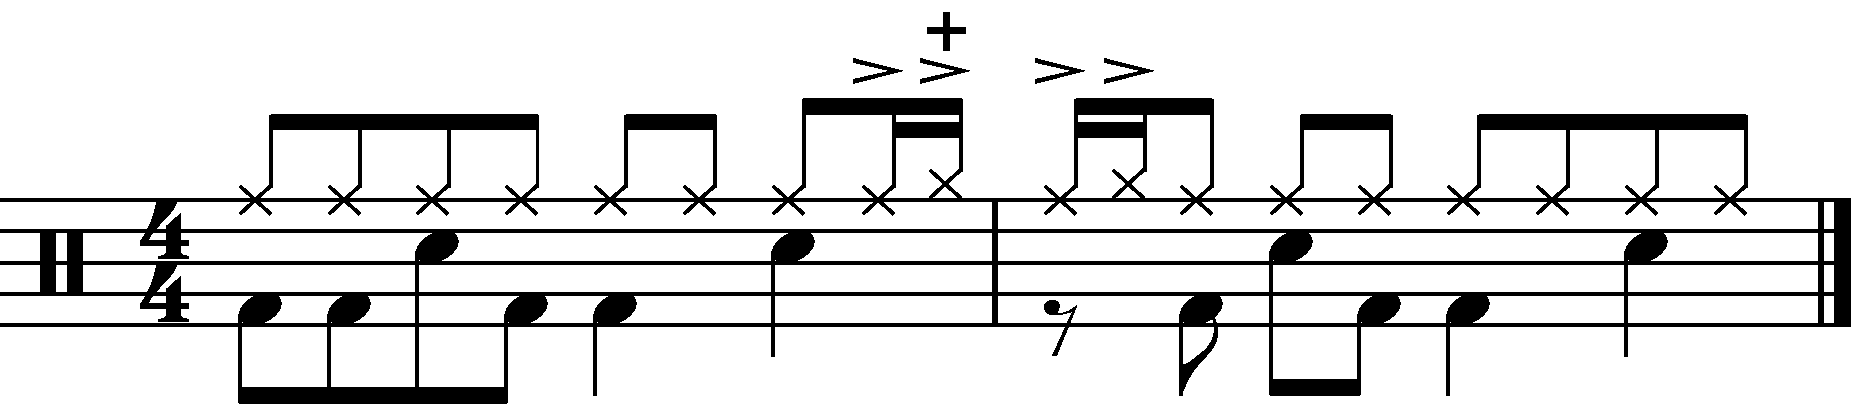 A two bar groove with staggered 16th note hi hat decoration in the middle of the bar